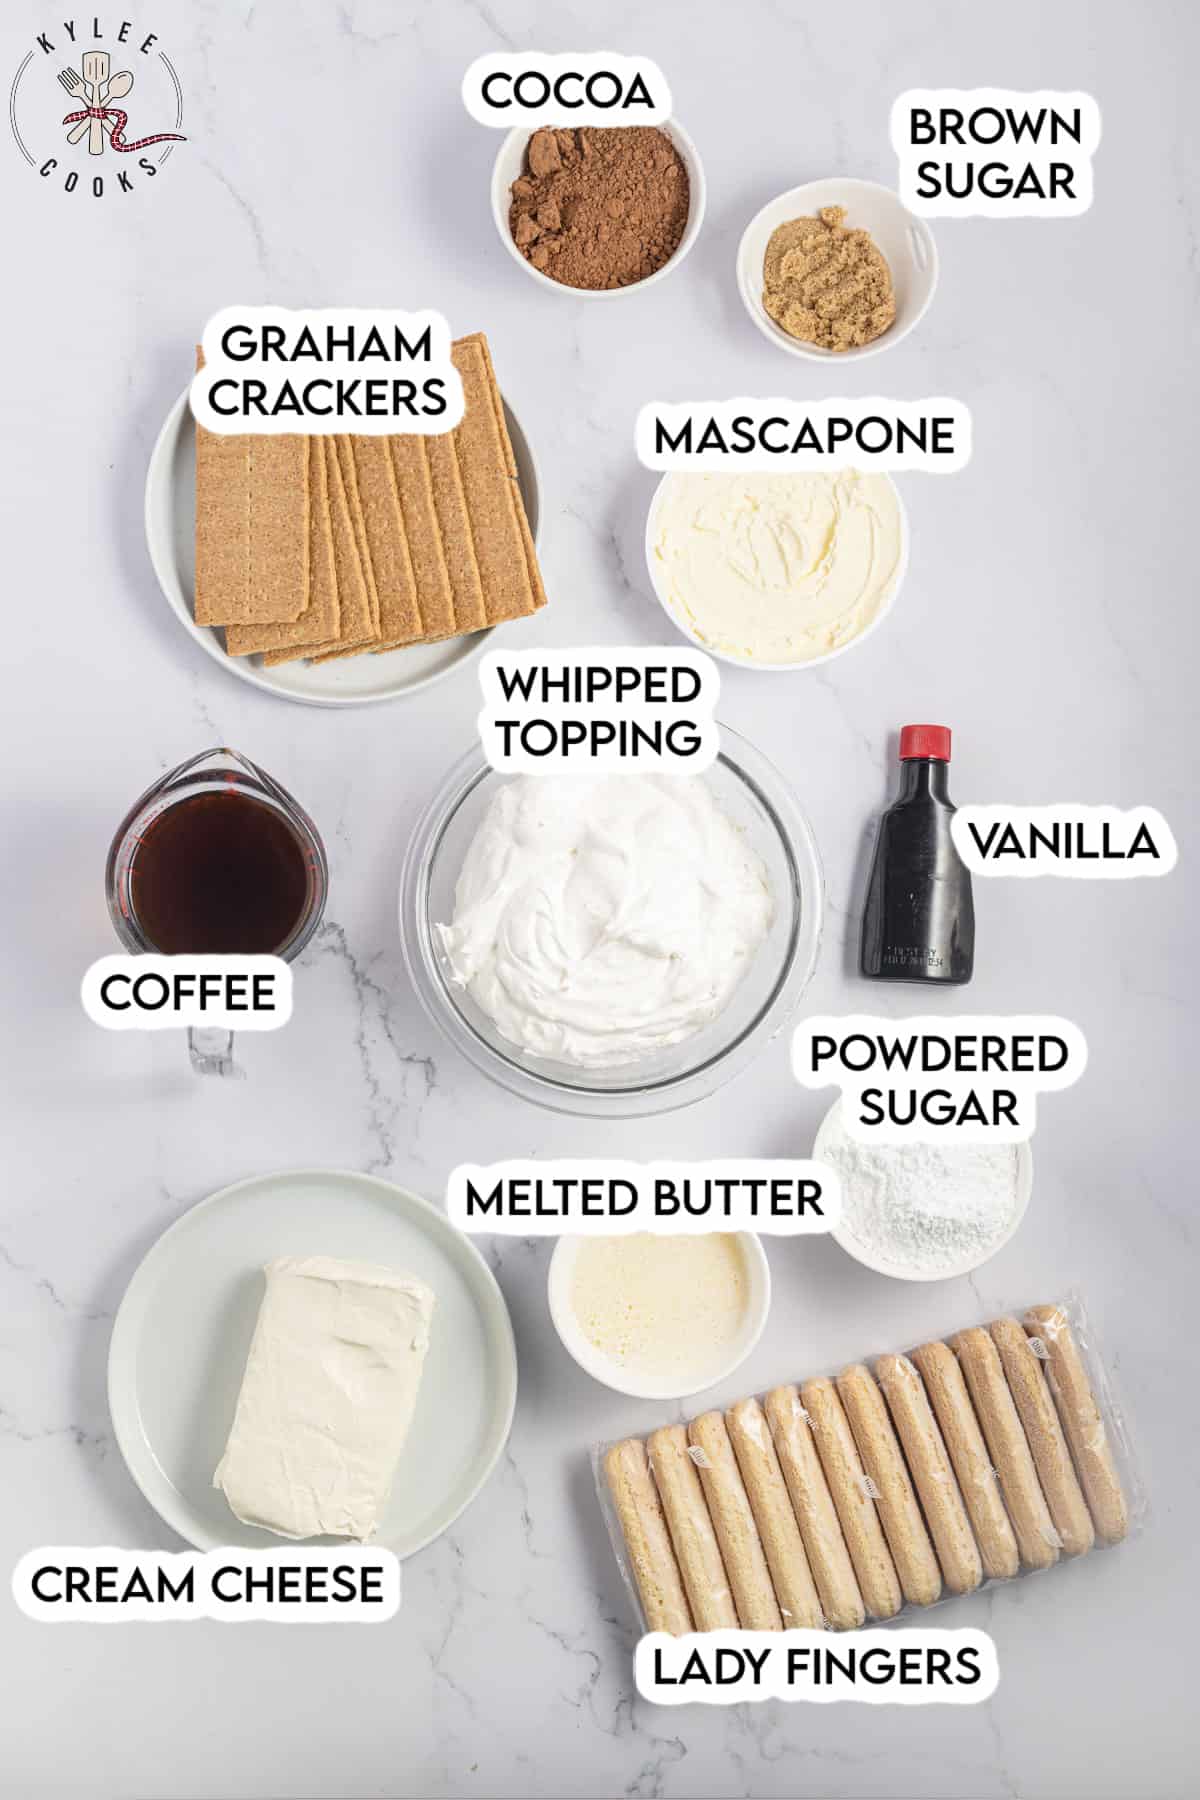 ingredients to make tiramisu cheesecake, laid out and labeled.